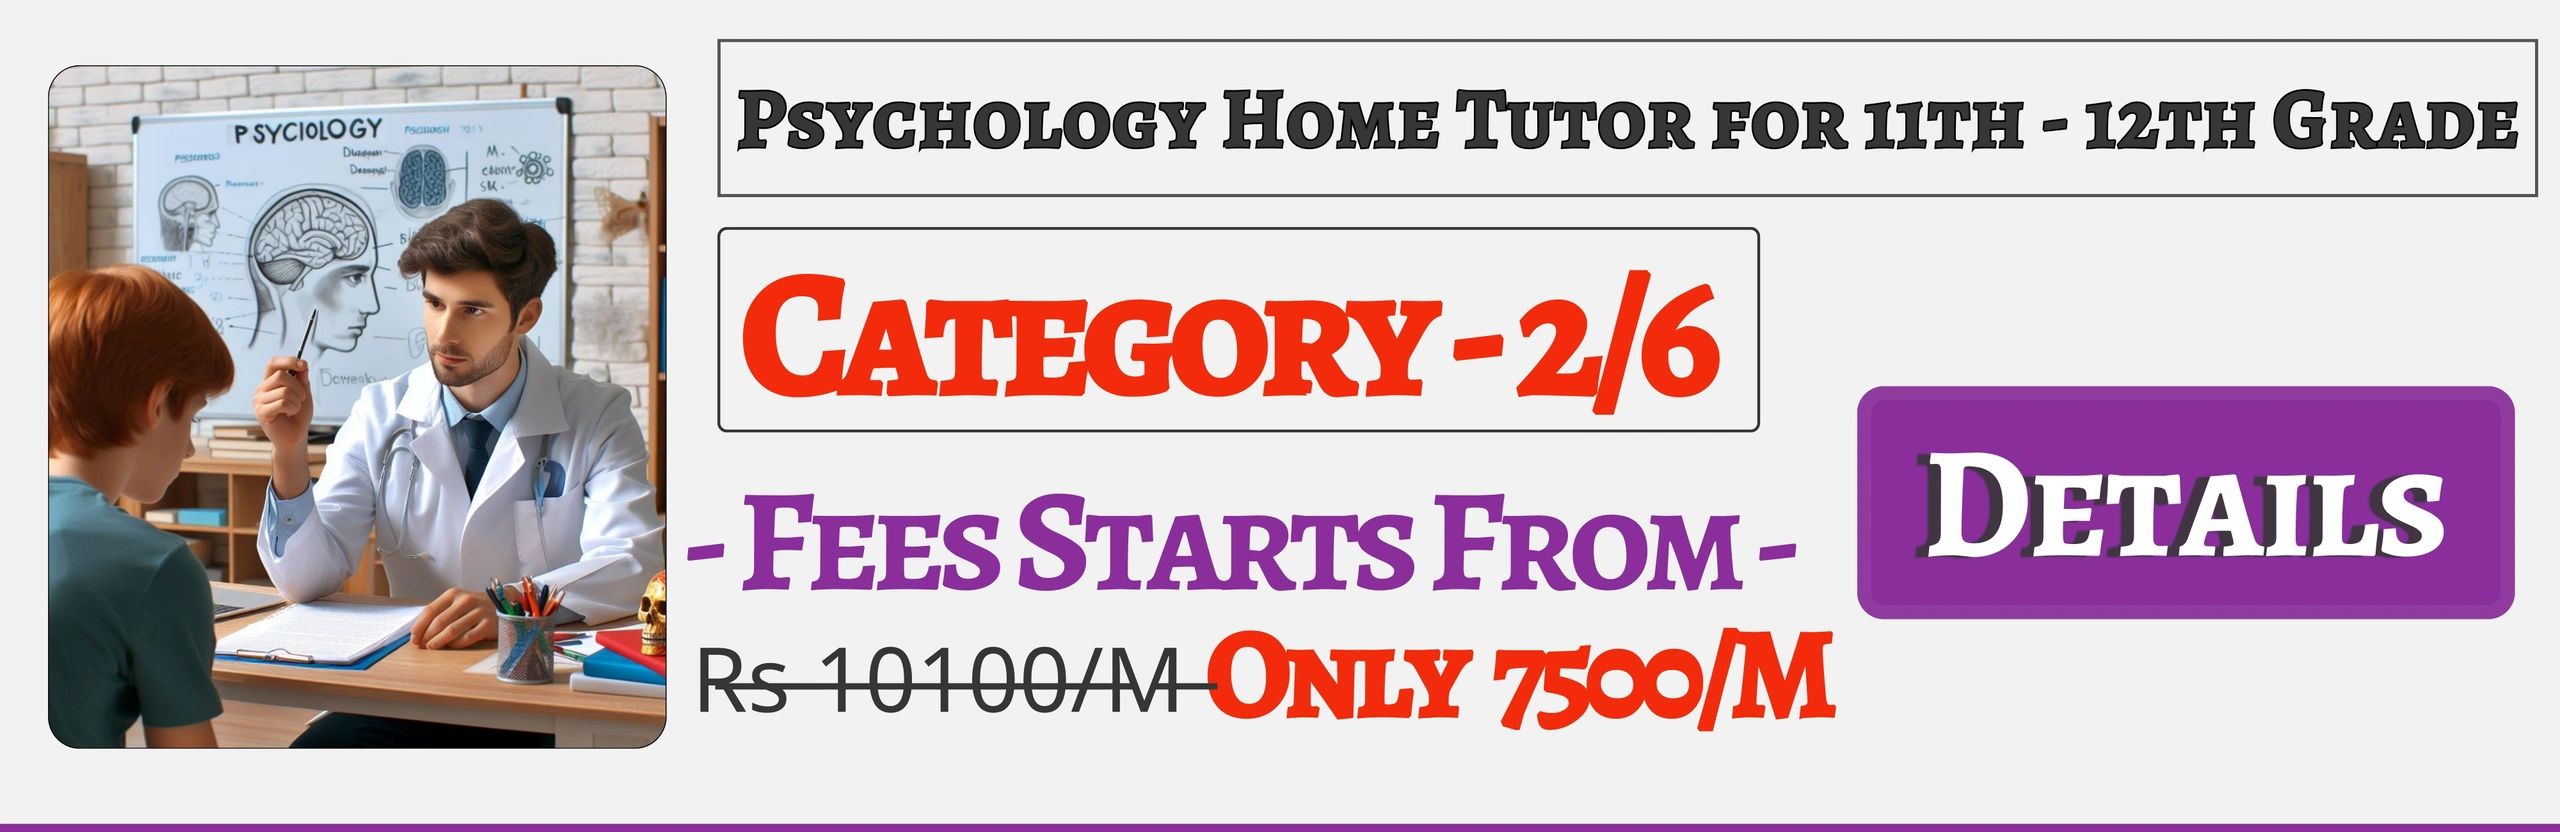 Book Best Nearby Psychology Home Tuition Tutors For 11th & 12th In Jaipur , Fees Only 7500/M